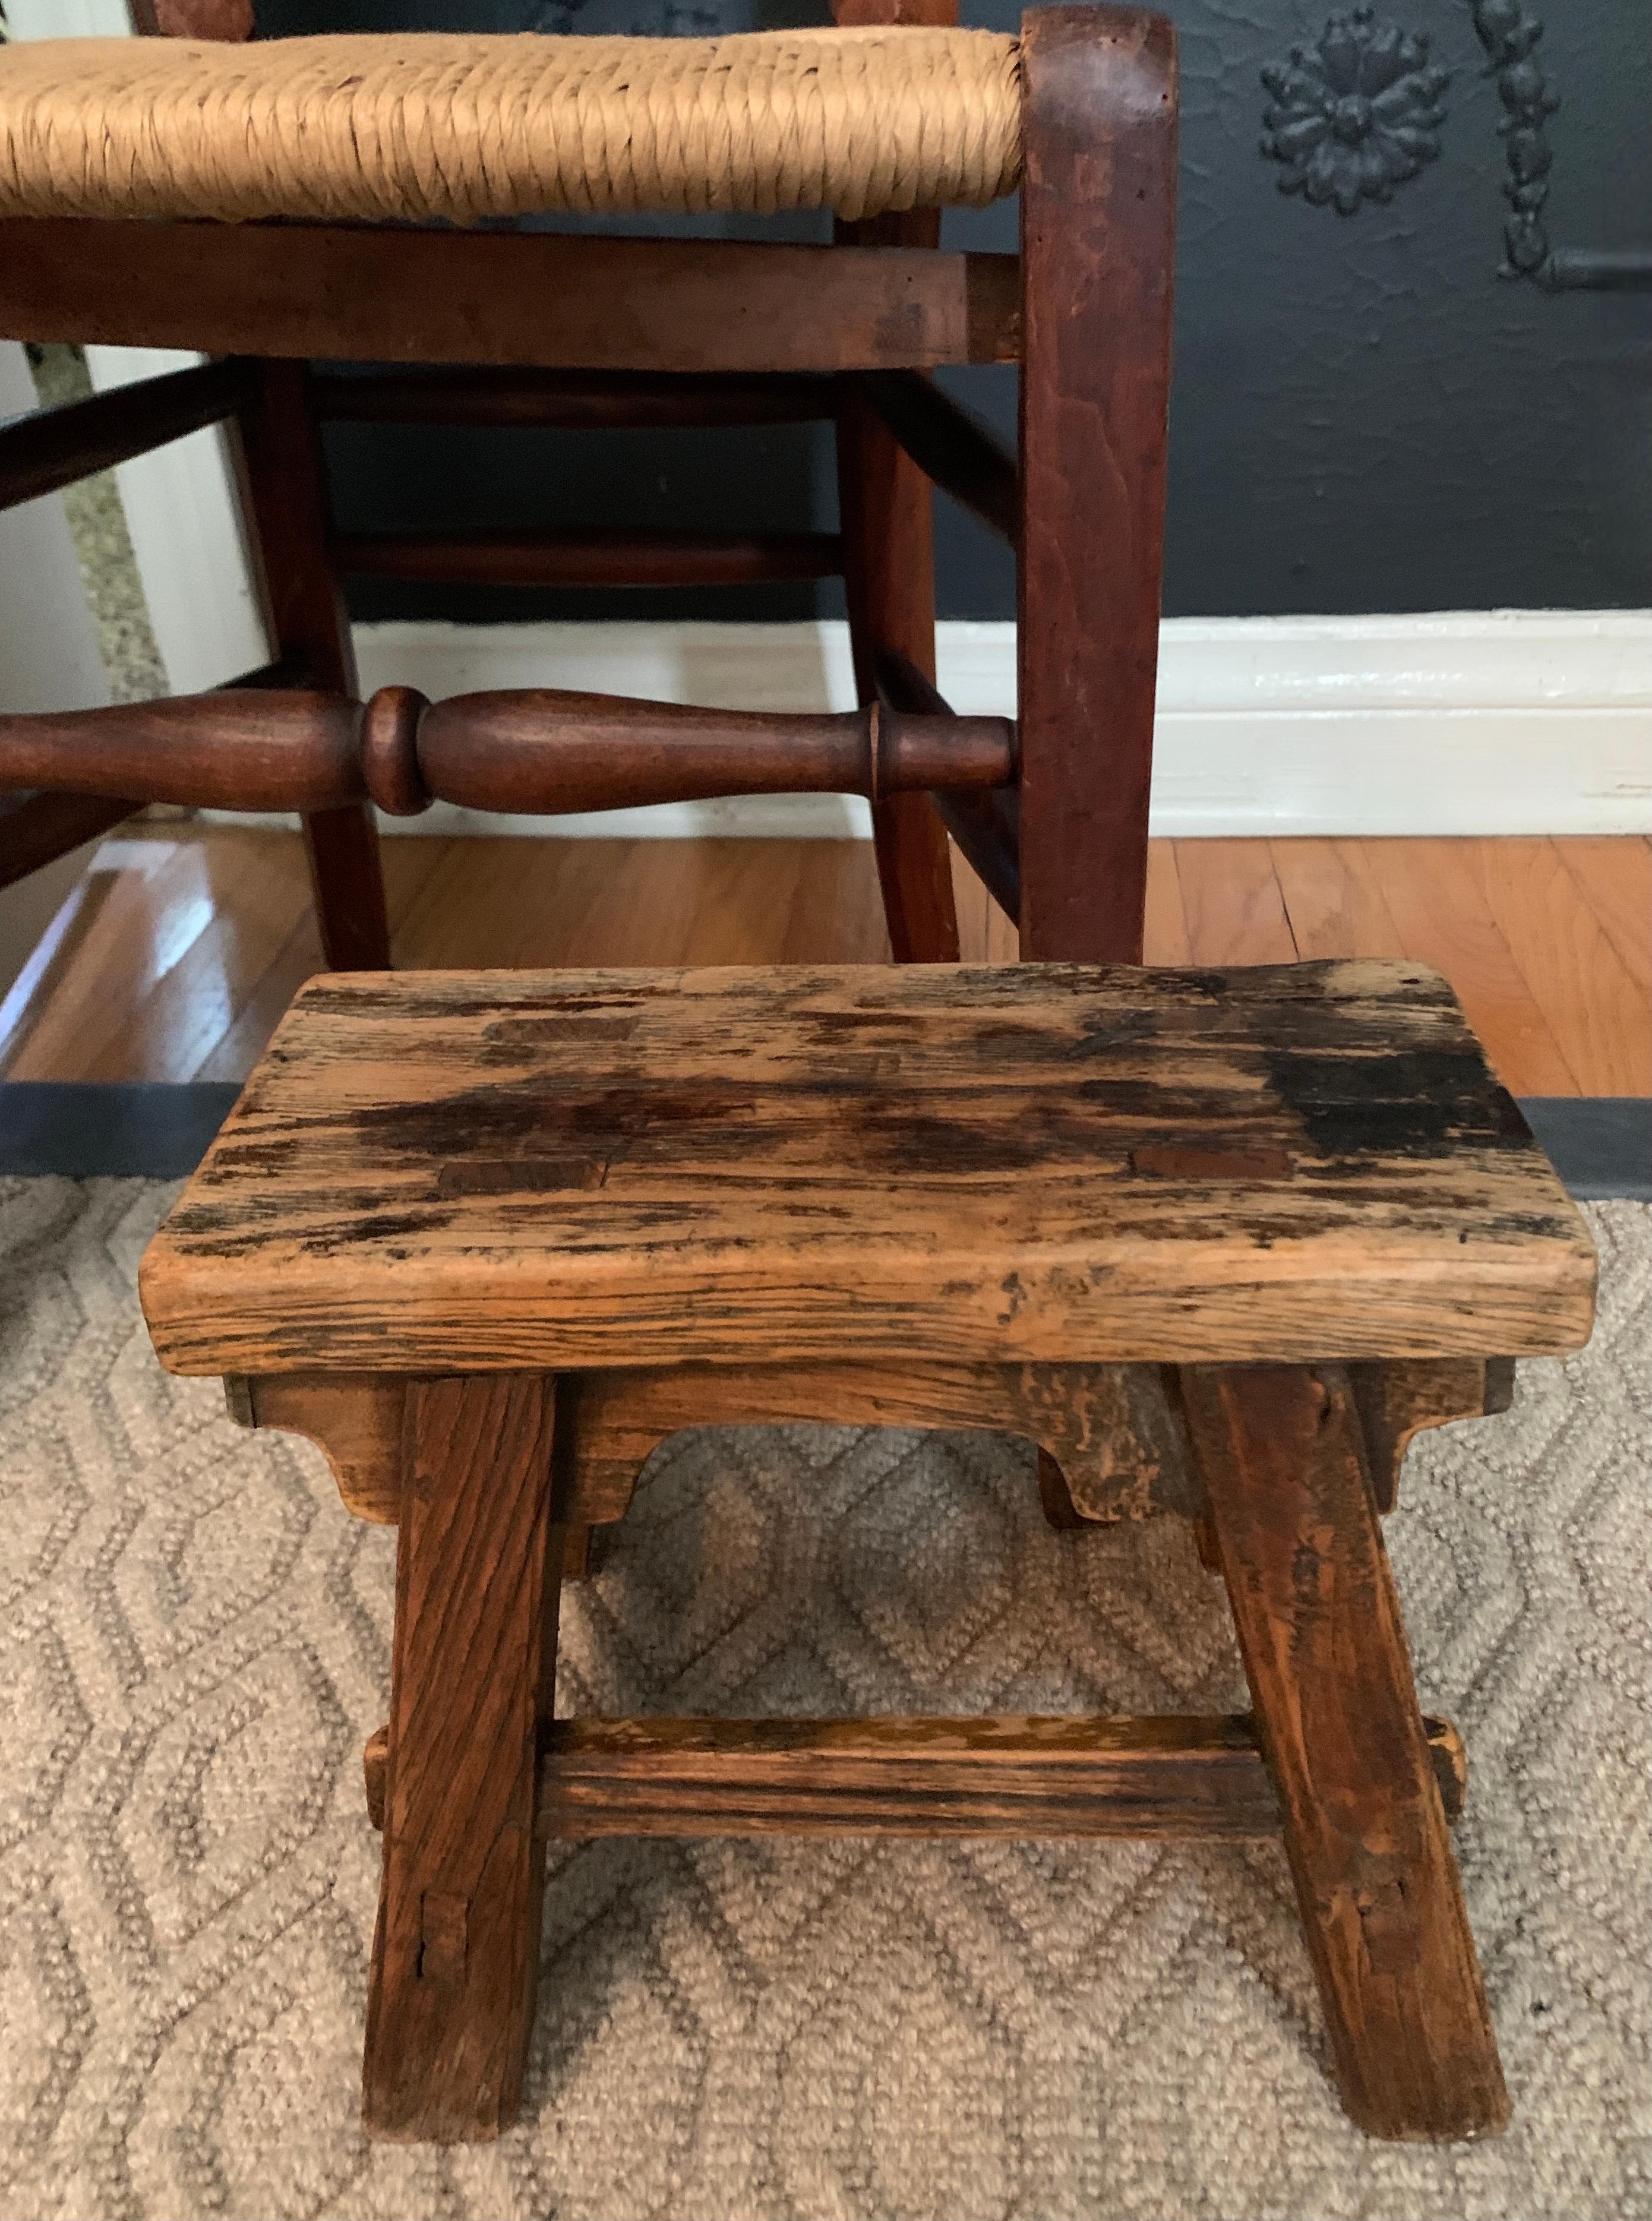 An exceptional milk or step stool hand crafted of solid wood with no modern screws, or nails. The stool is entirely jointed tongue and groove, and carved with precision and care, finish nails are used to apply the end caps which are not weight